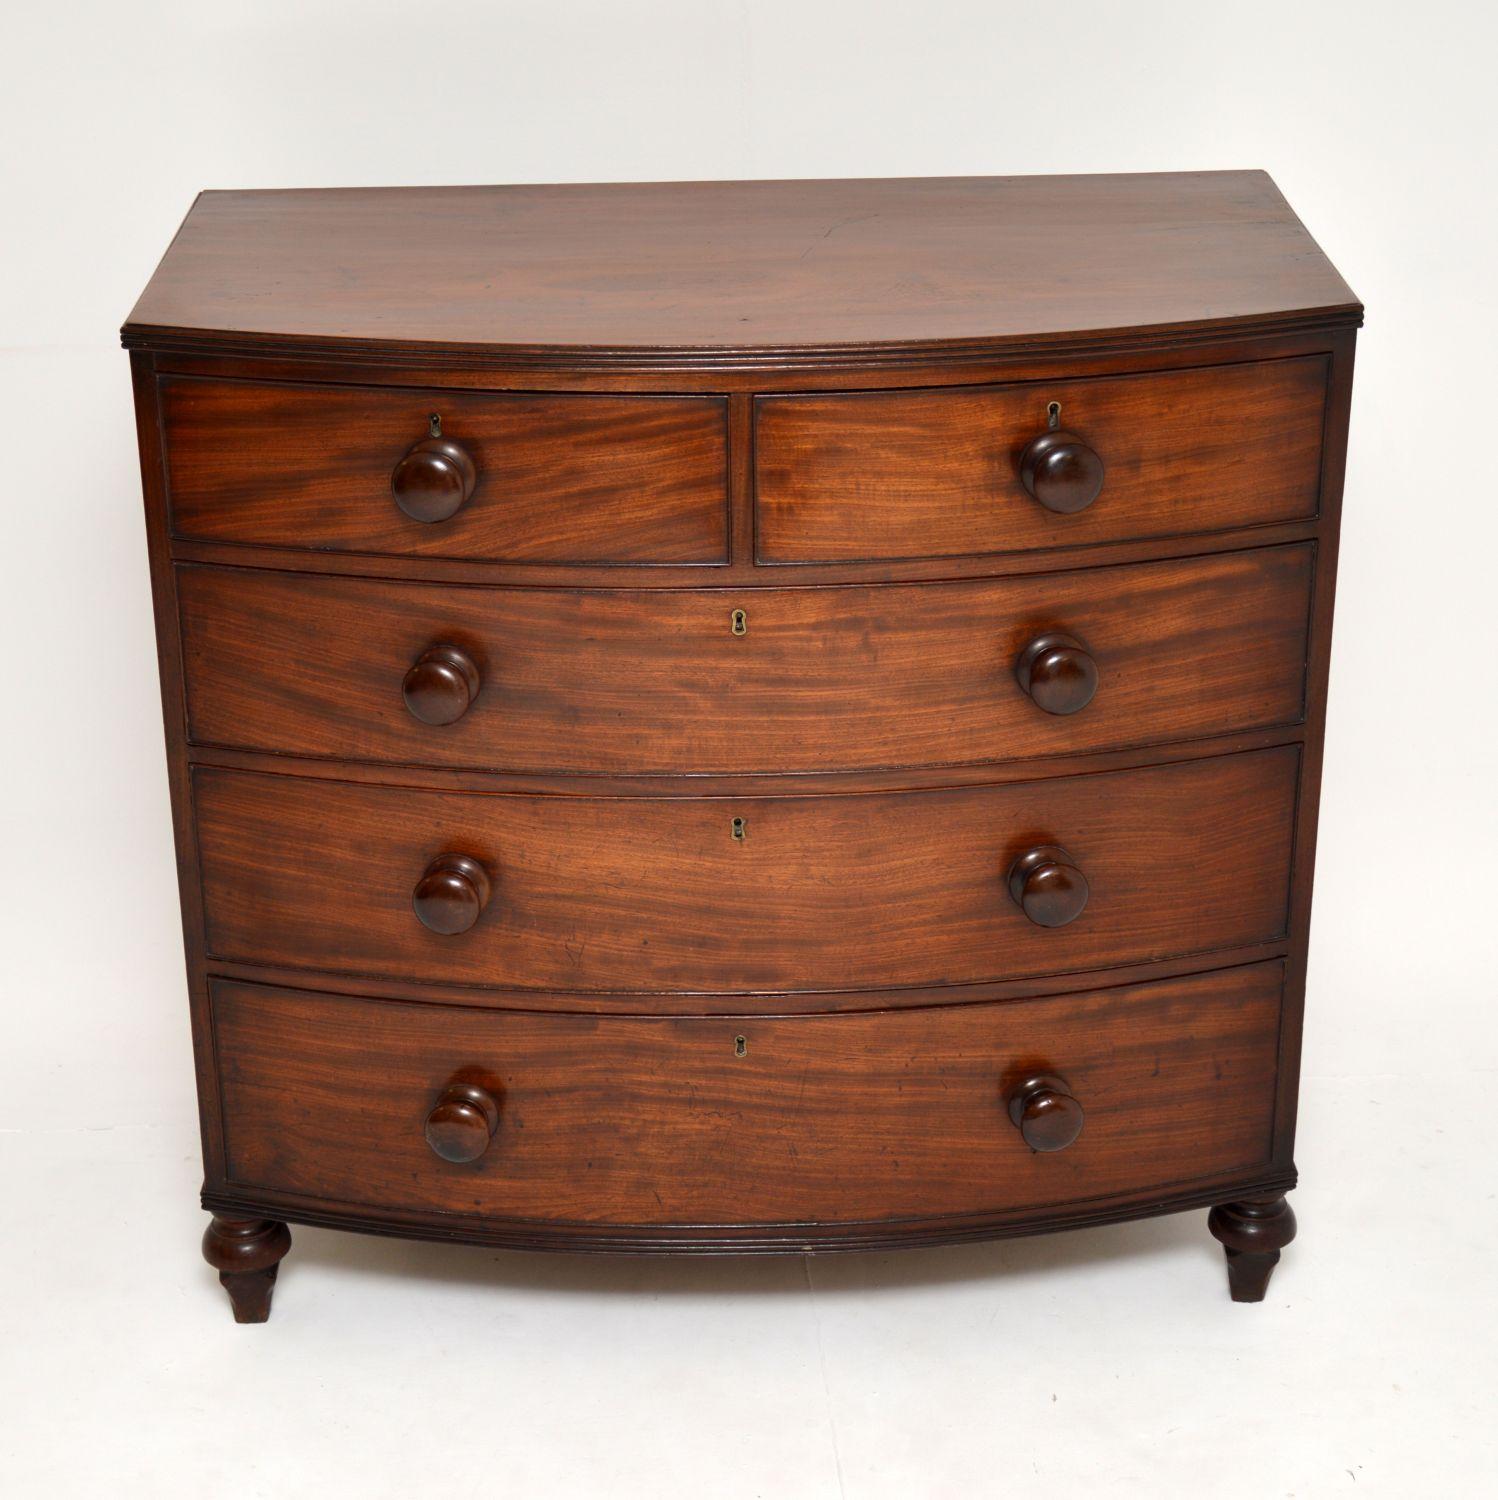 A wonderful antique mahogany bow fronted chest of drawers from the early Victorian period. This dates from circa 1840-1850.

The quality is superb, with reeded top and bottom edges and beautifully turned handles and feet. The drawers are solid